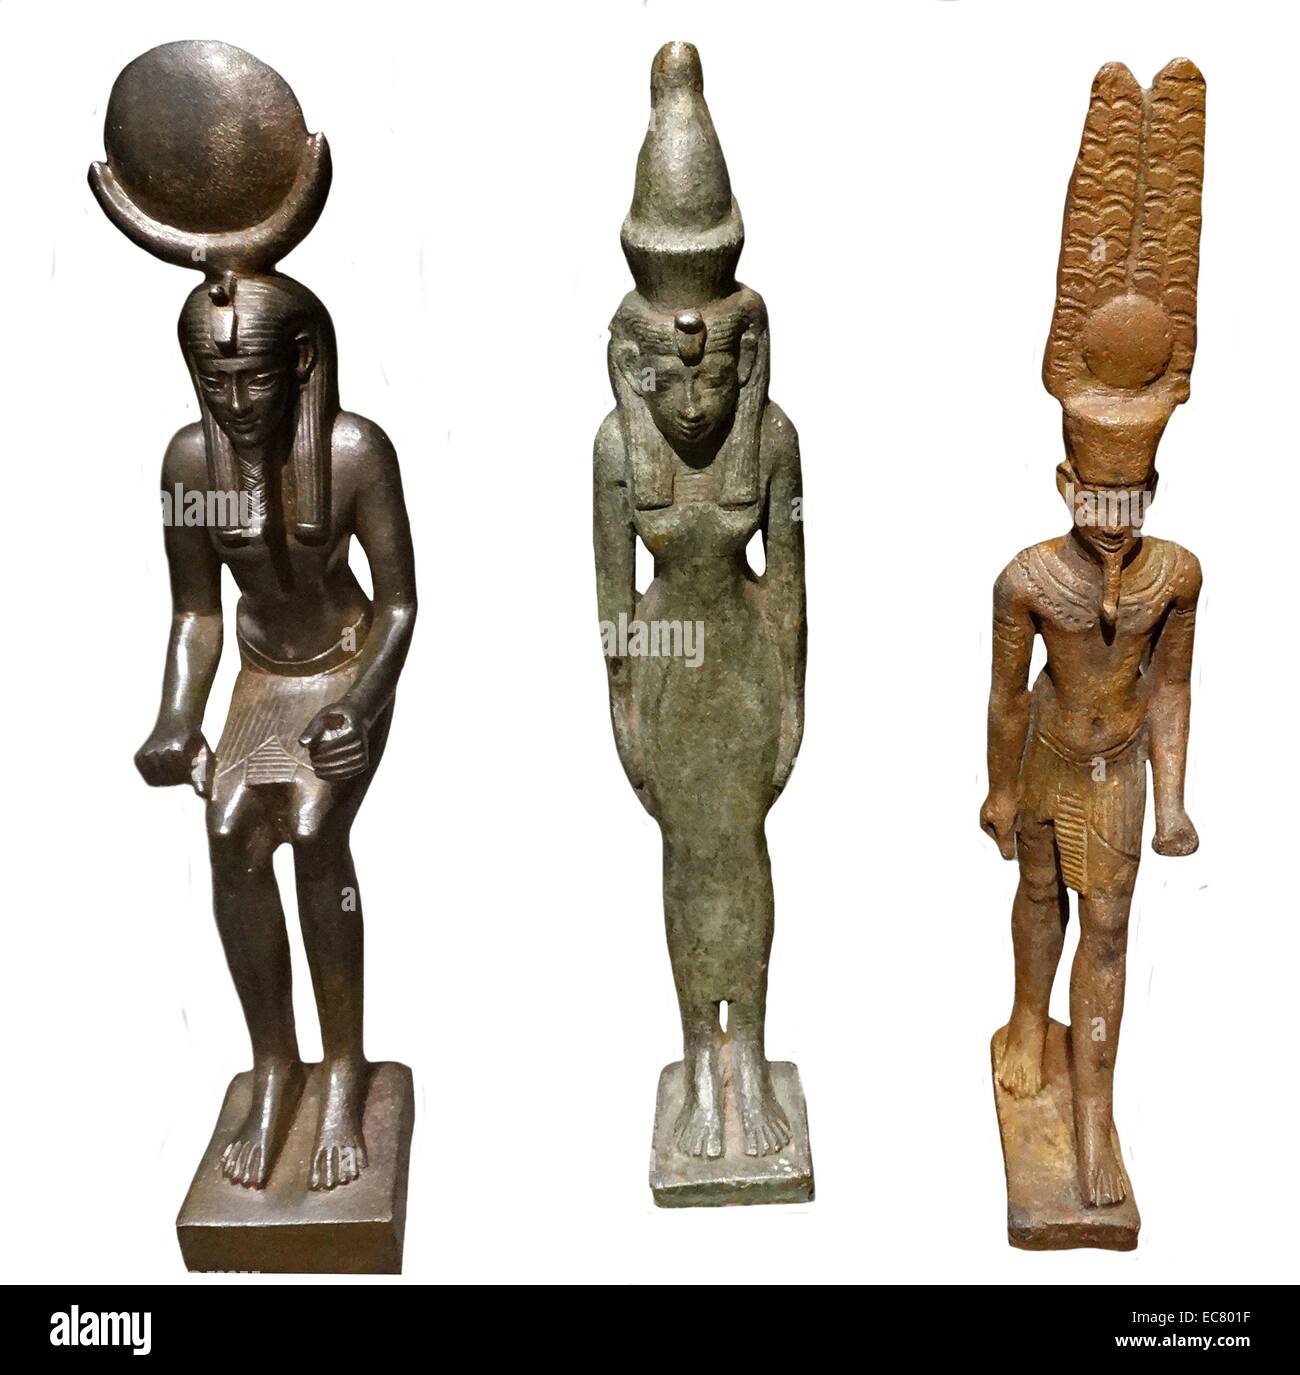 Left to right: Khonsu, Mut and Amun; gods of ancient Egypt. Khonsu was a god whose main role was associated with the moon; Mut, which meant mother in the ancient Egyptian language, was an ancient Egyptian mother goddess with multiple aspects; Amun acquired national importance, expressed in his fusion with the Sun god, Ra, as Amun-Ra. Stock Photo